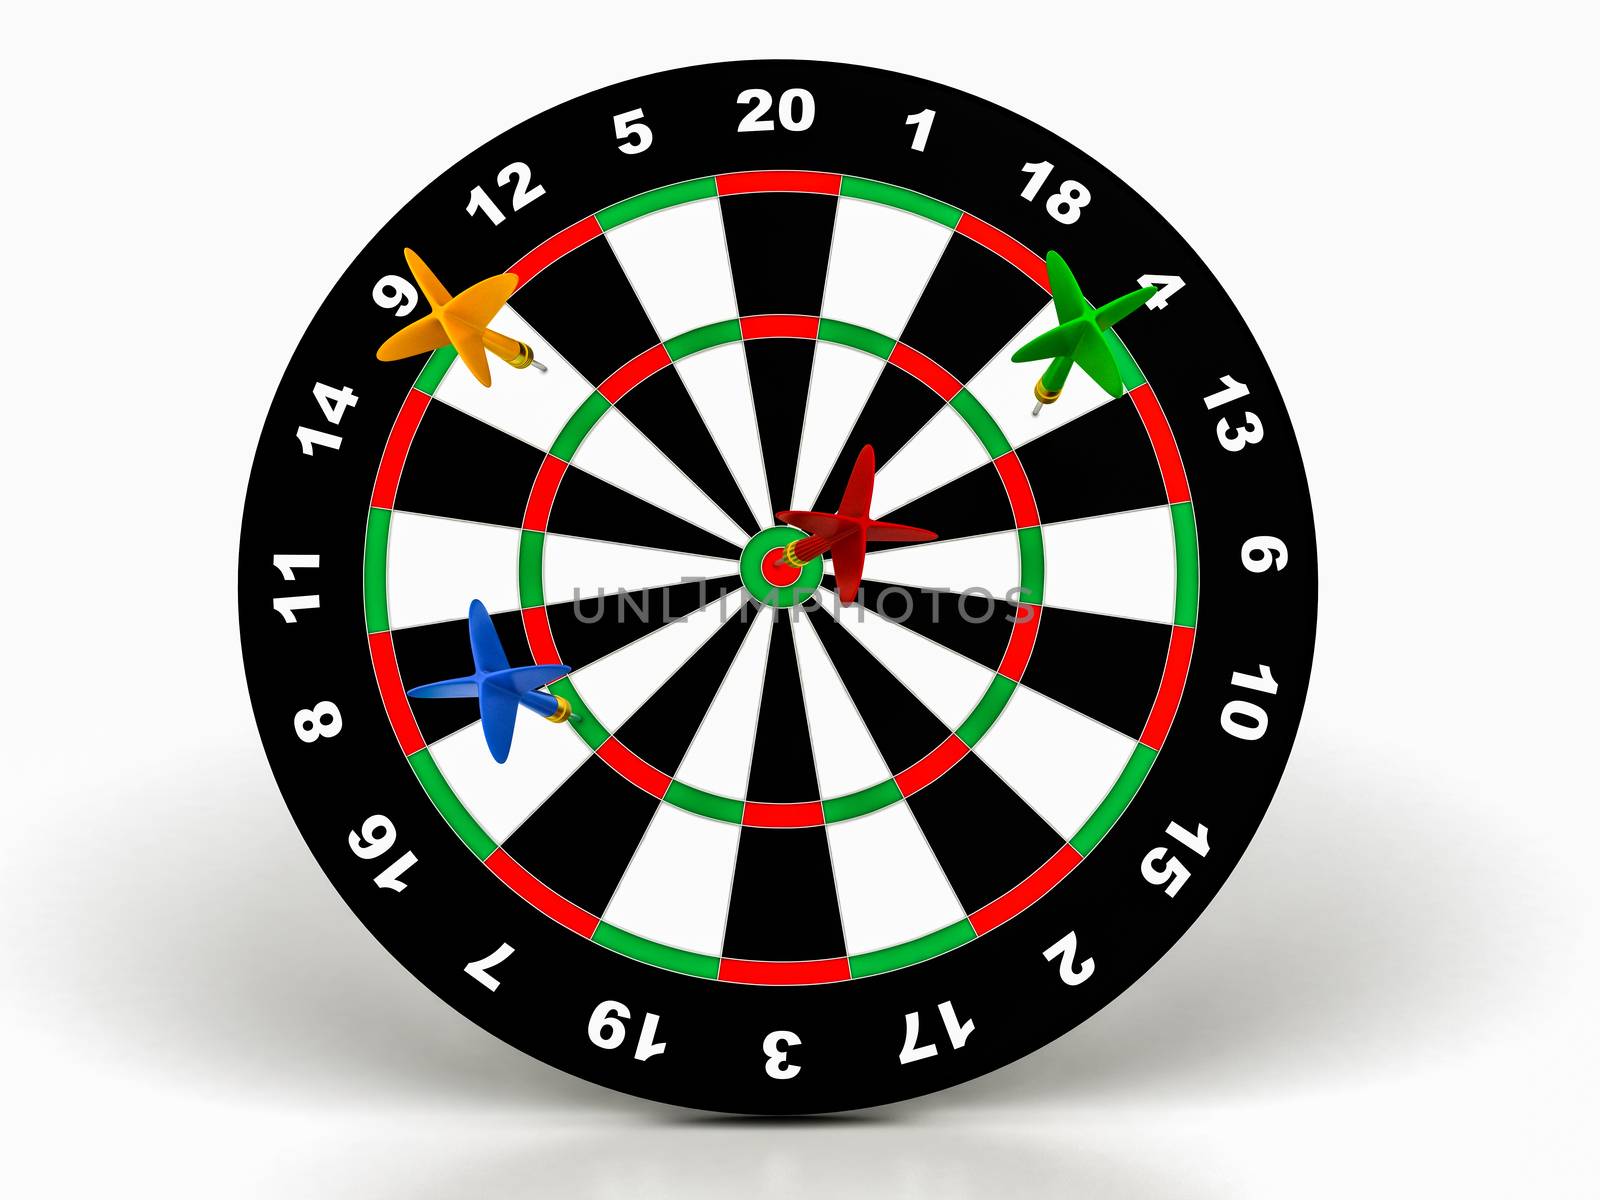 3d darts on target by Lupen